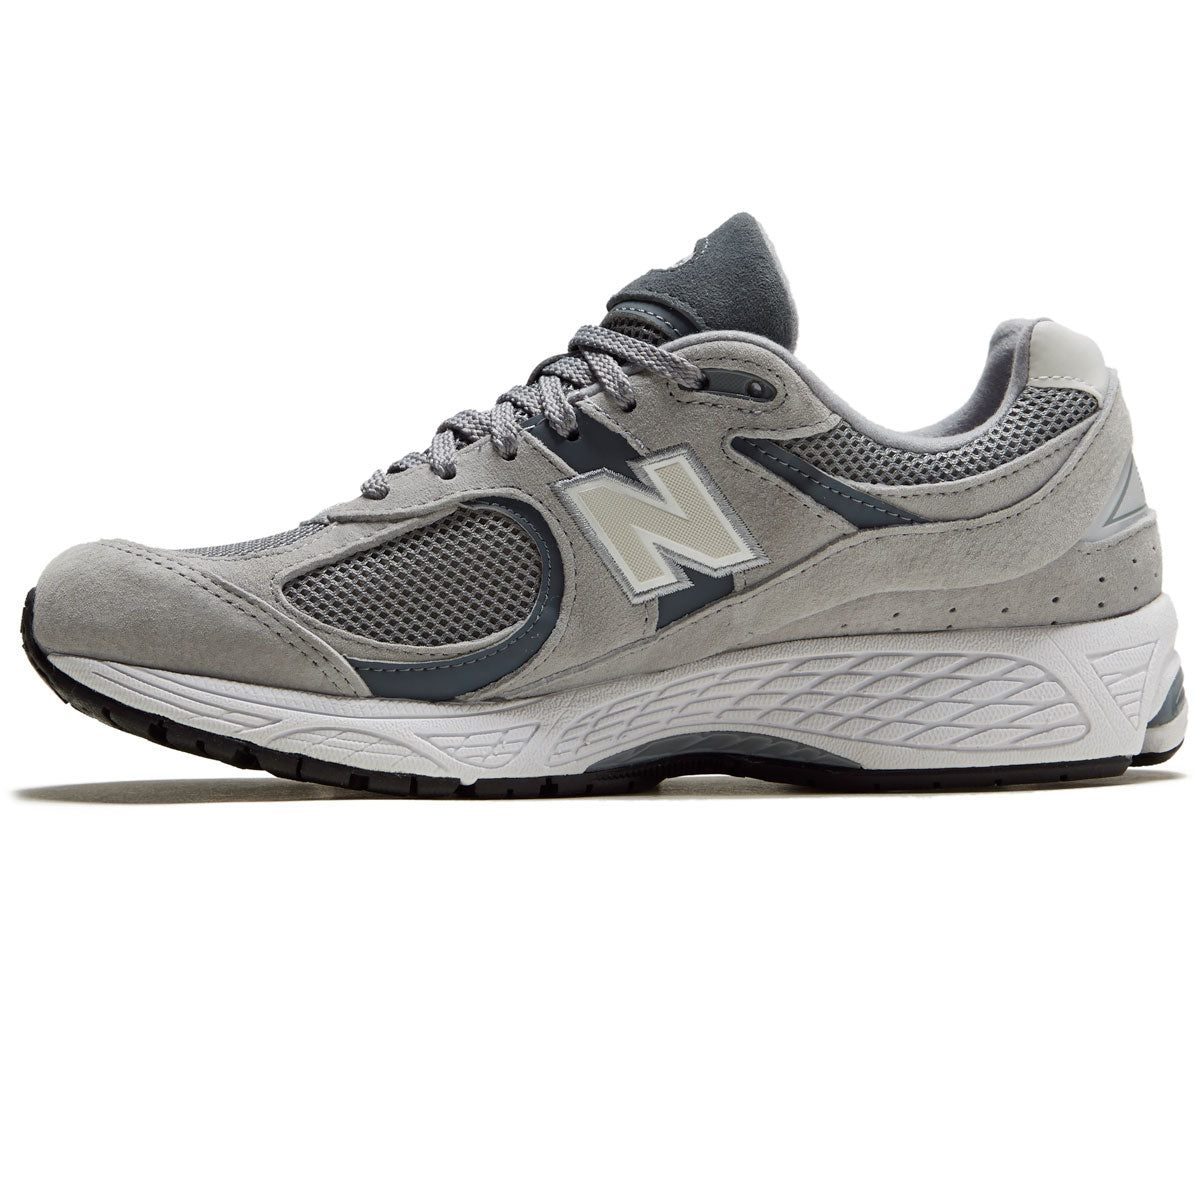 New Balance 2002R Shoes - Steel/Lead/Orca/ Silver Mink image 2